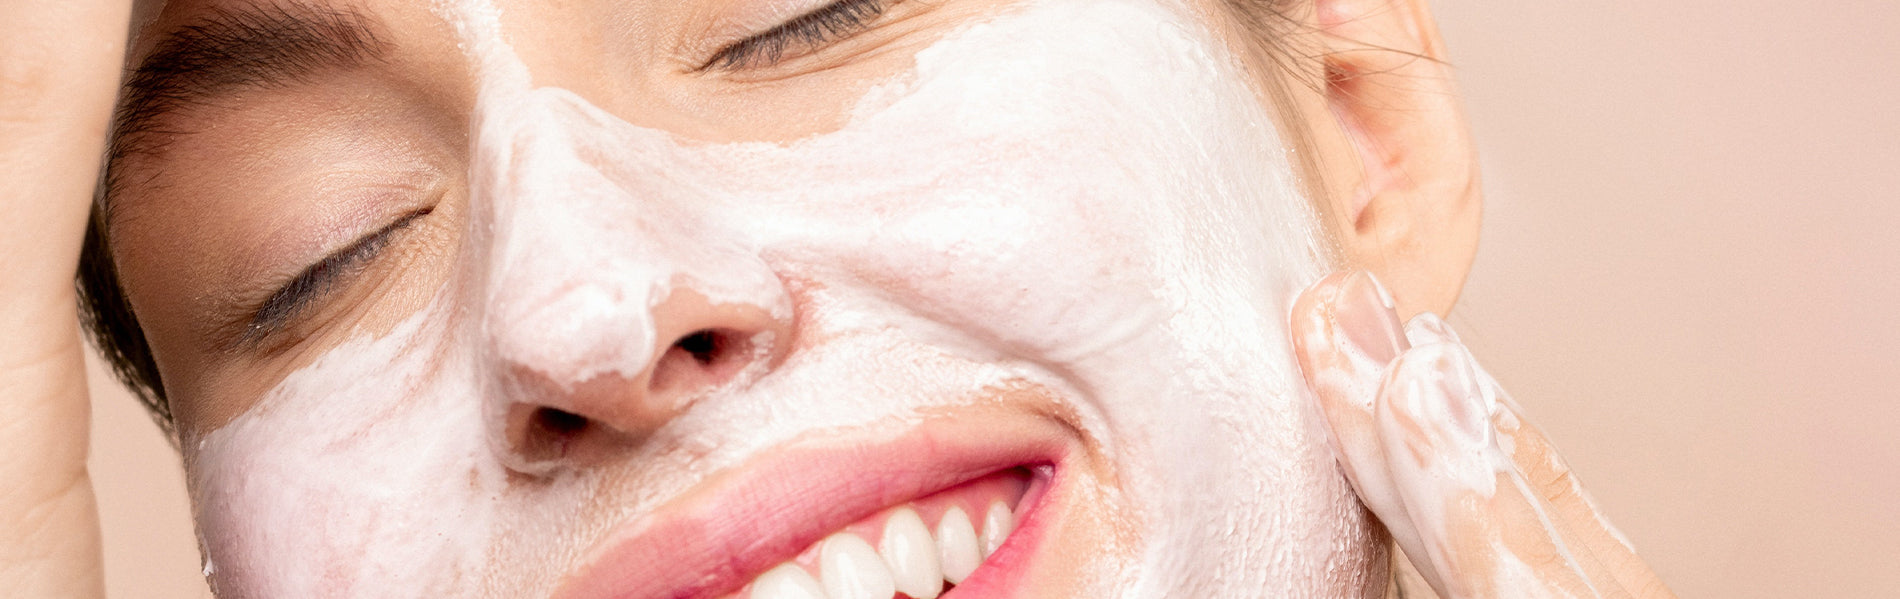 7 Acne-Targeting Skincare Steps That Will Make A Difference